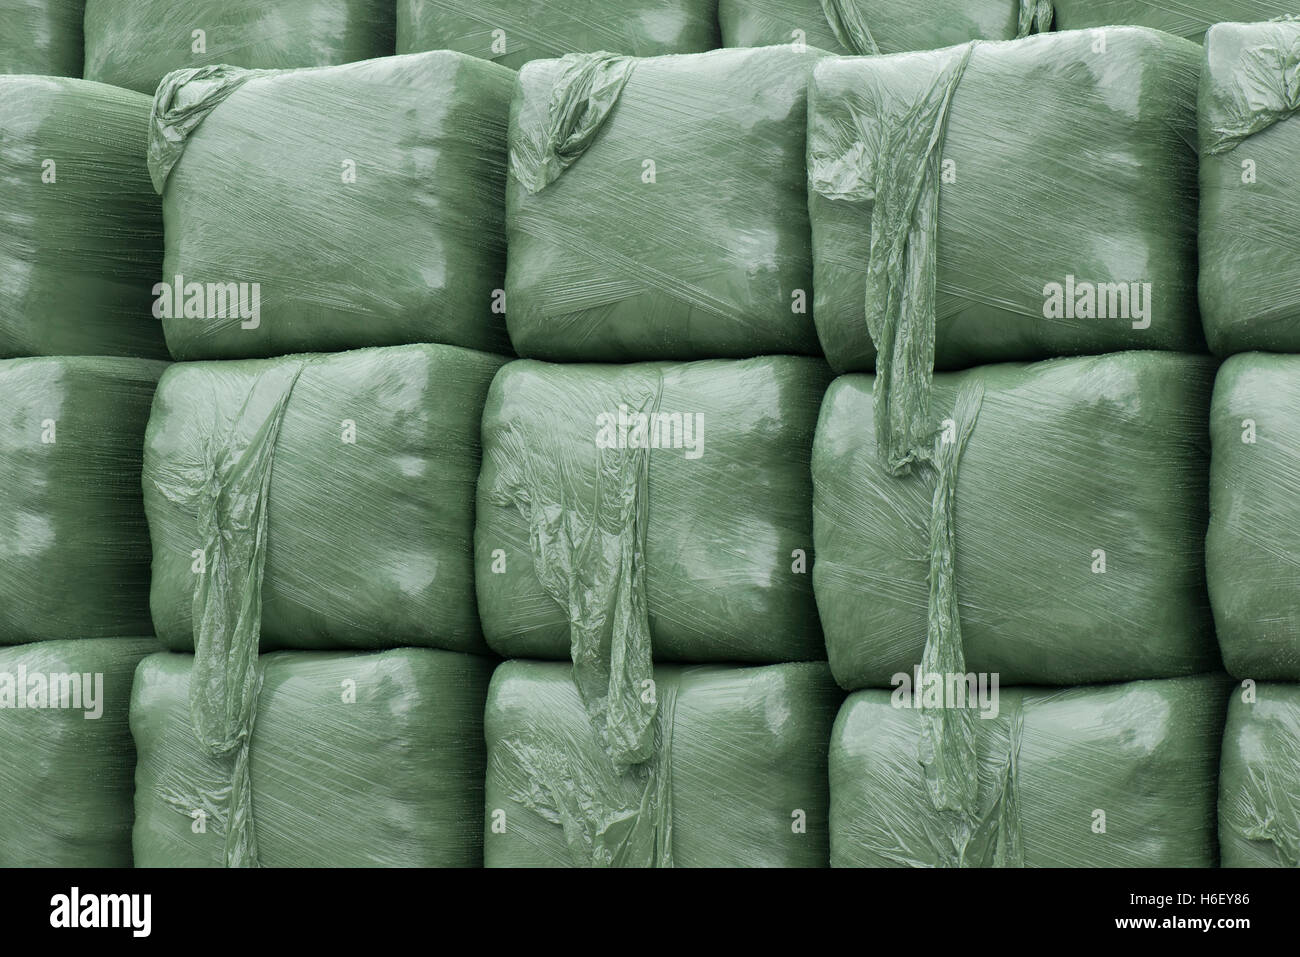 Square plastic wrapped bags of silage for livestock winter feed, Hampshire, June Stock Photo